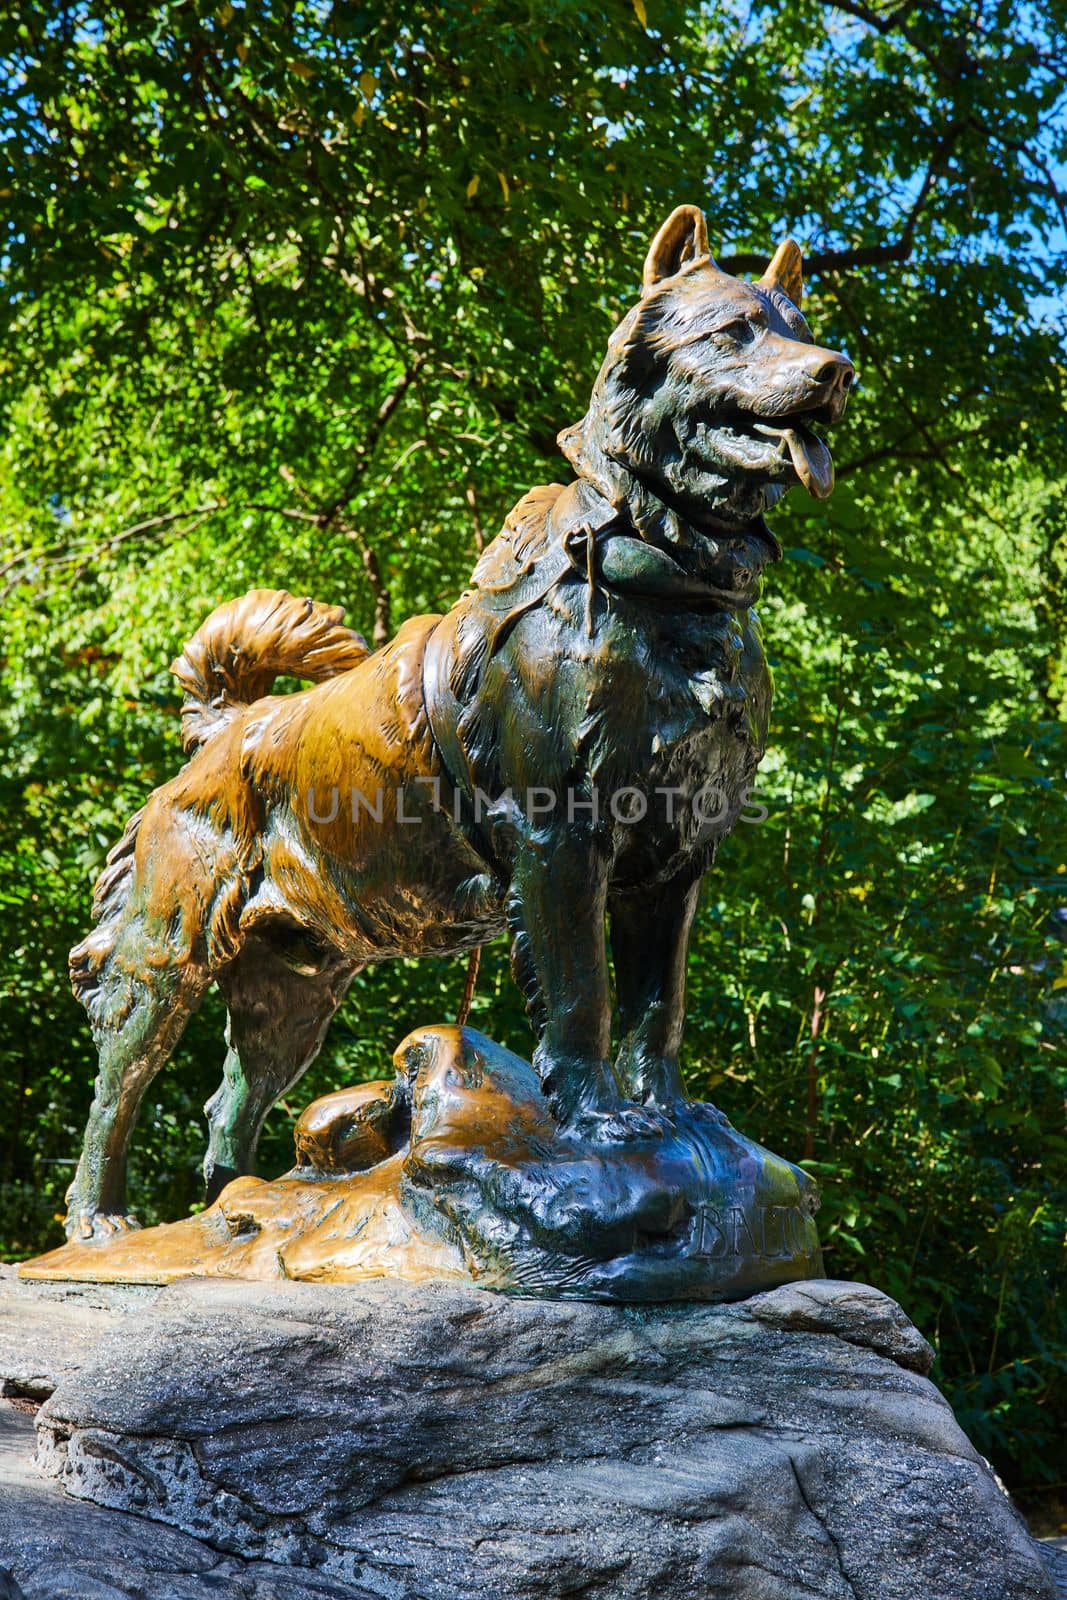 Image of Iconic Balto sled dog statue in Central Park New York City